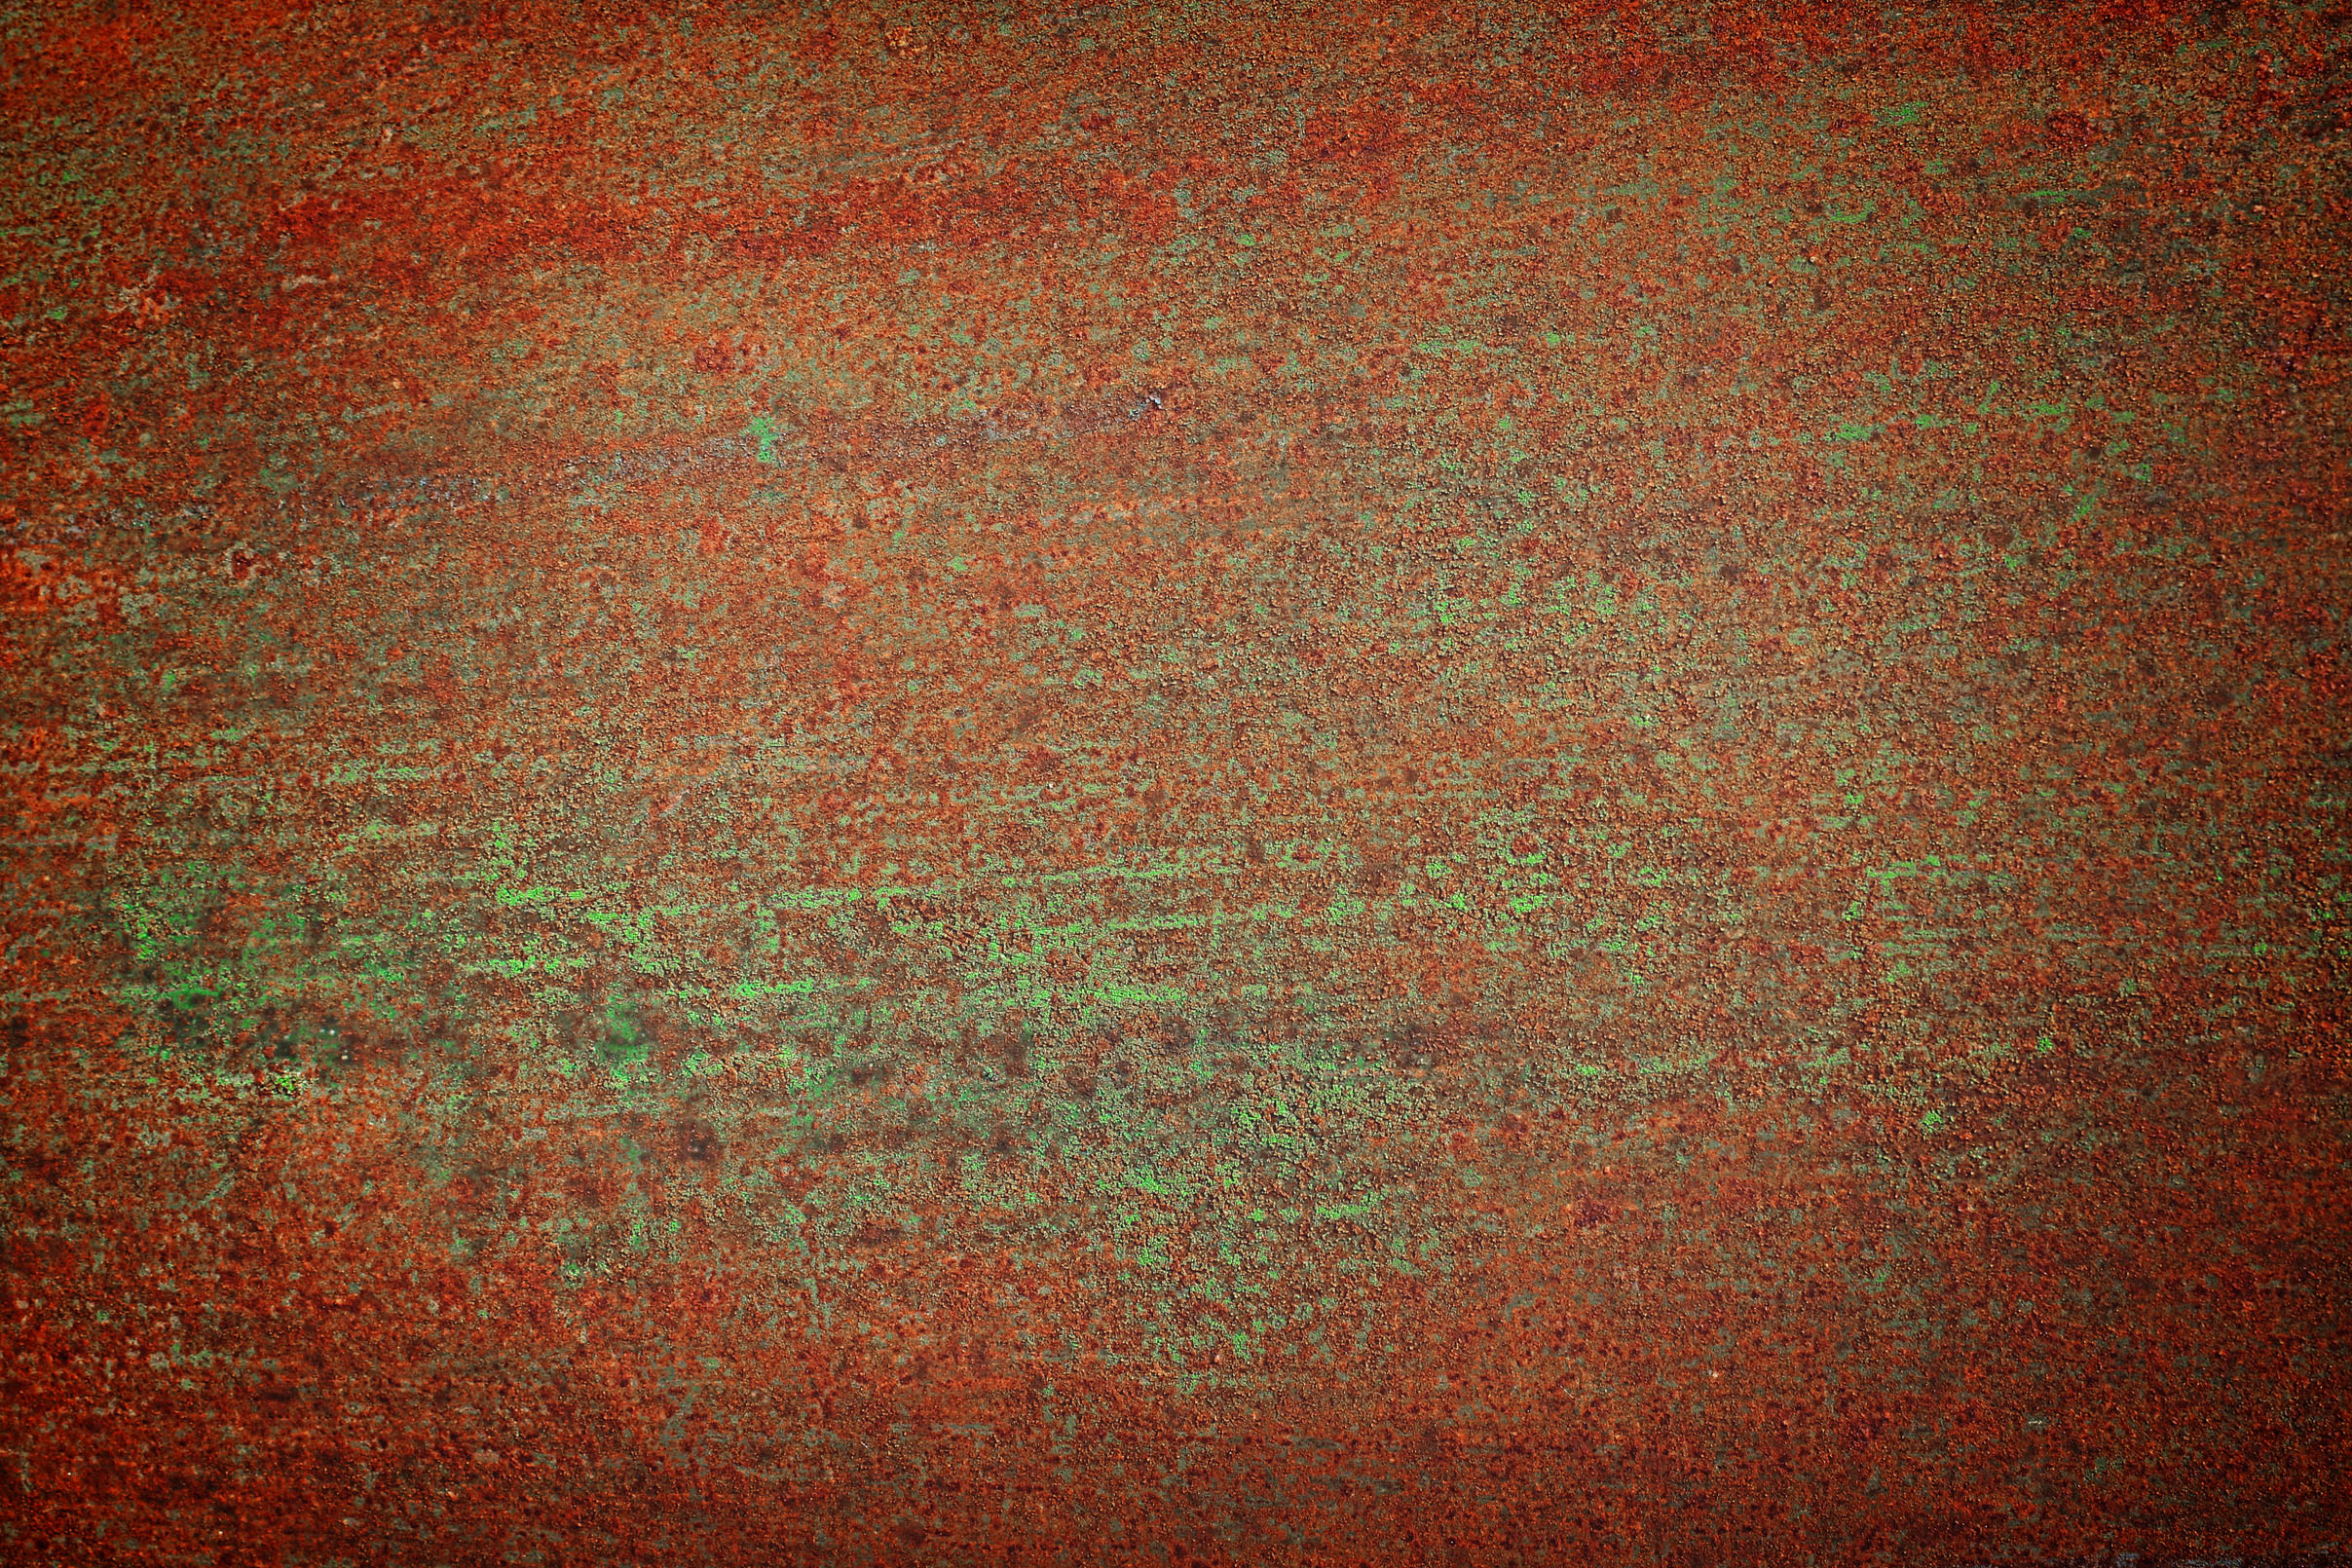 Rusty metal texture background photo